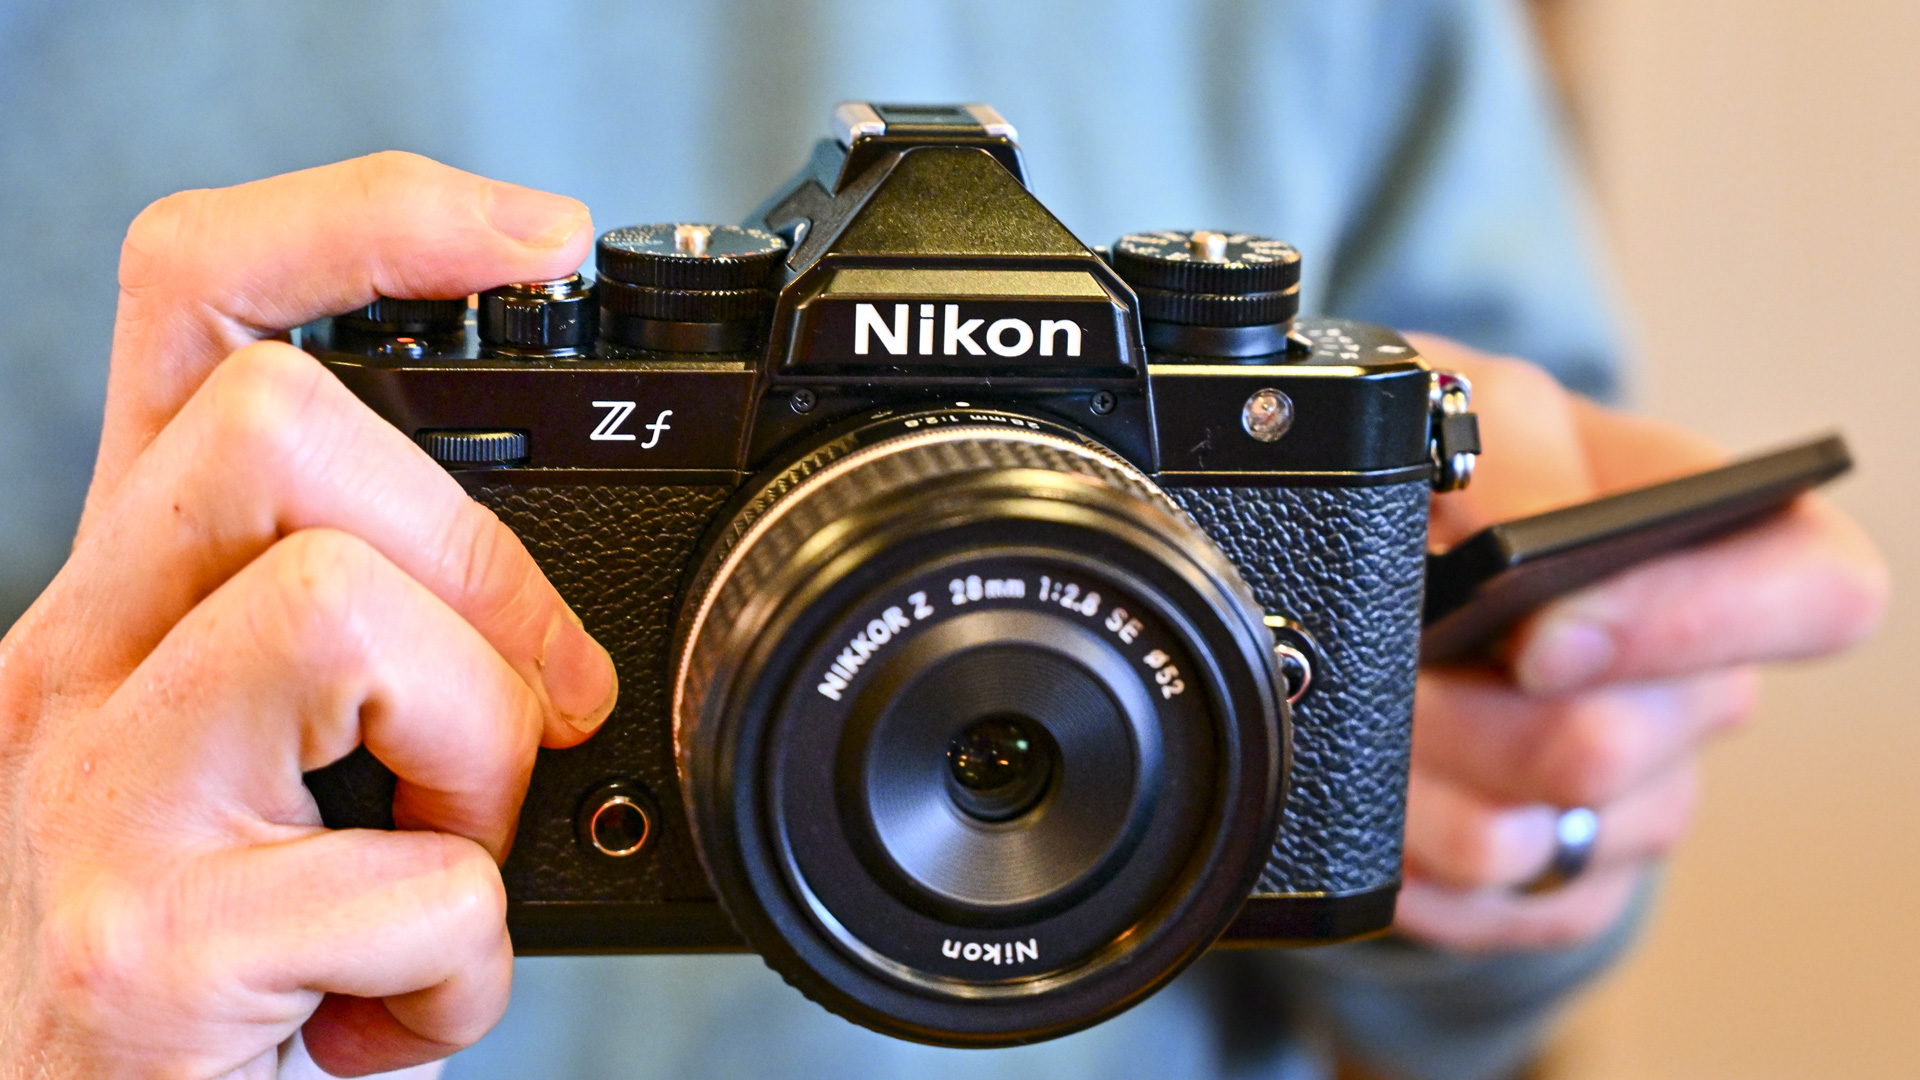 Nikon Zf camera in the hand with Z 28mm F2.8 SE lens attached